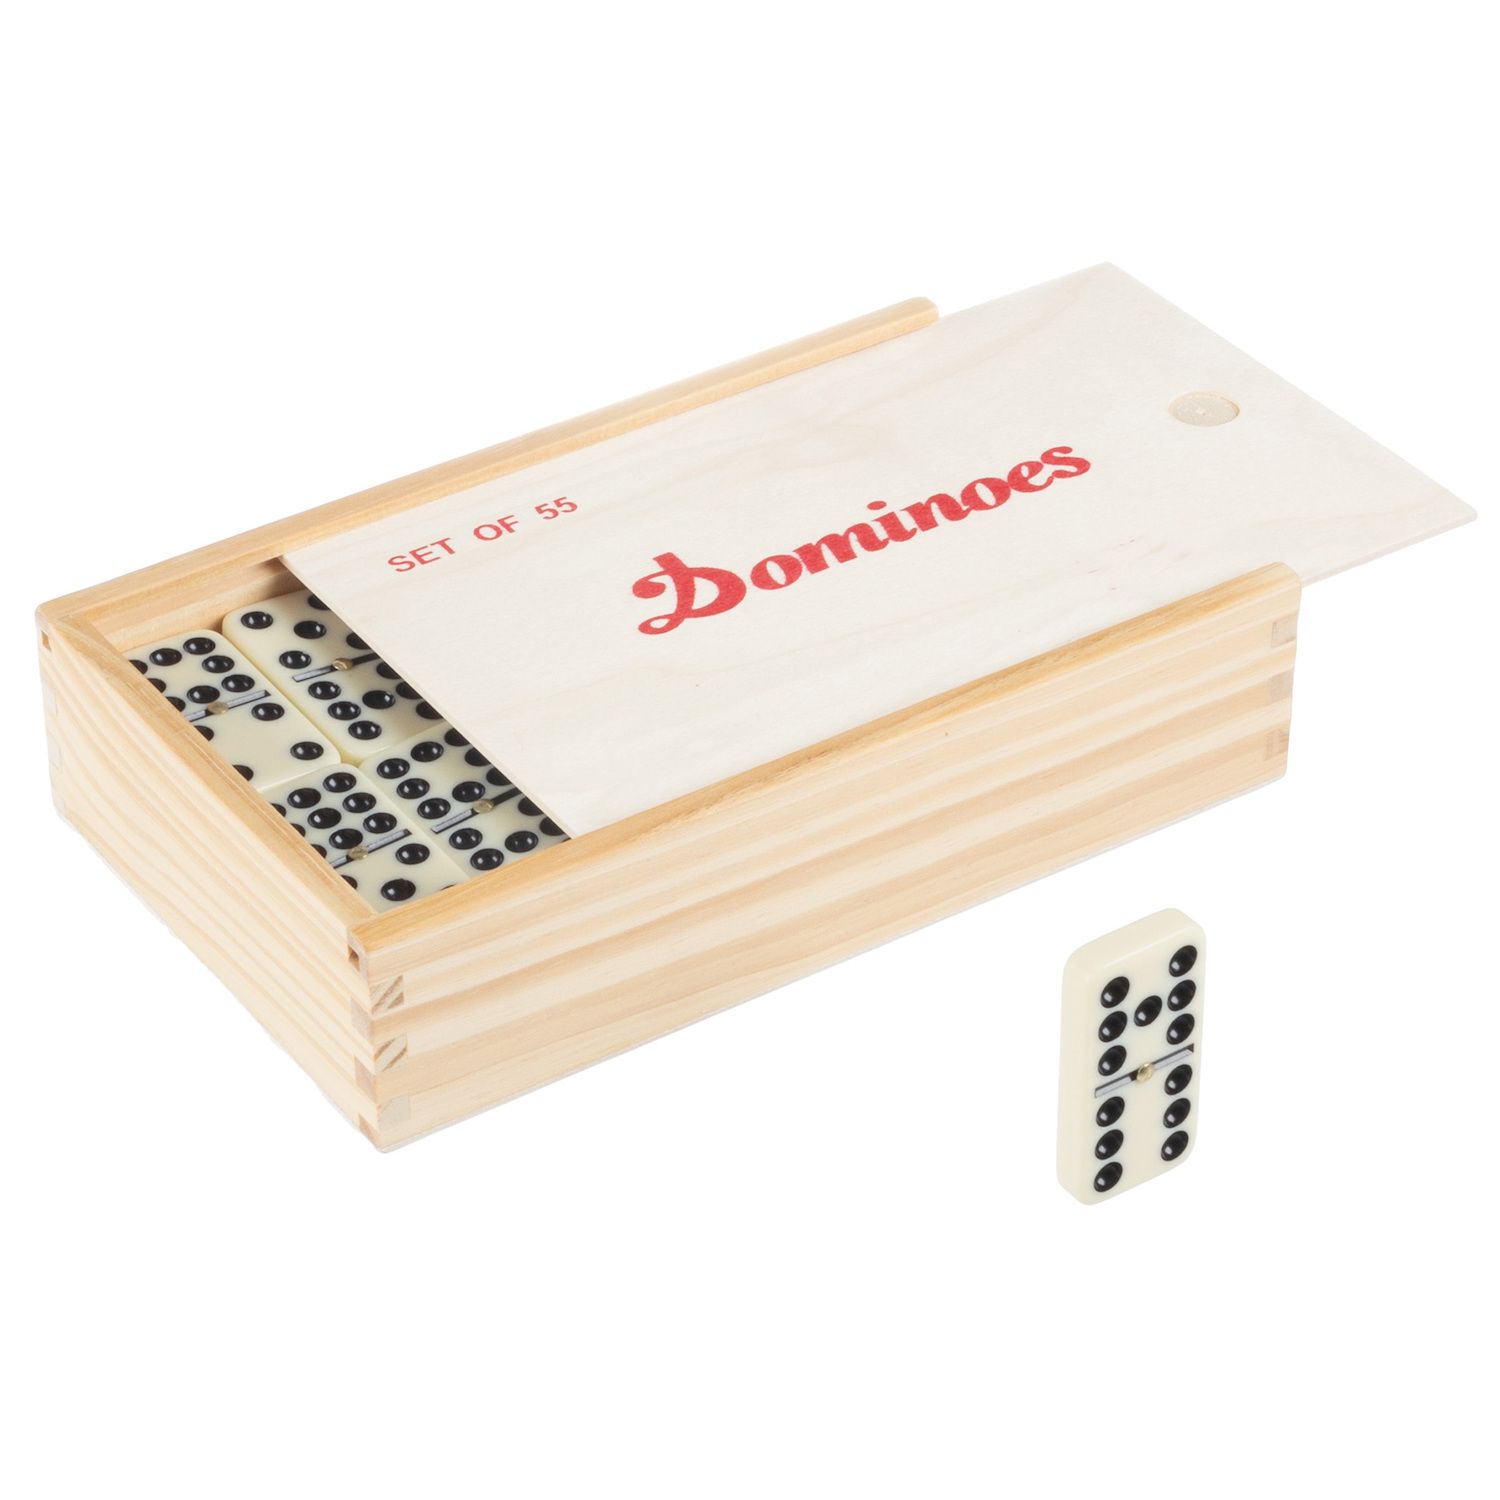 Bene Casa 55-pc Handcrafted Professional Double-9 Domino in Wooden Sto